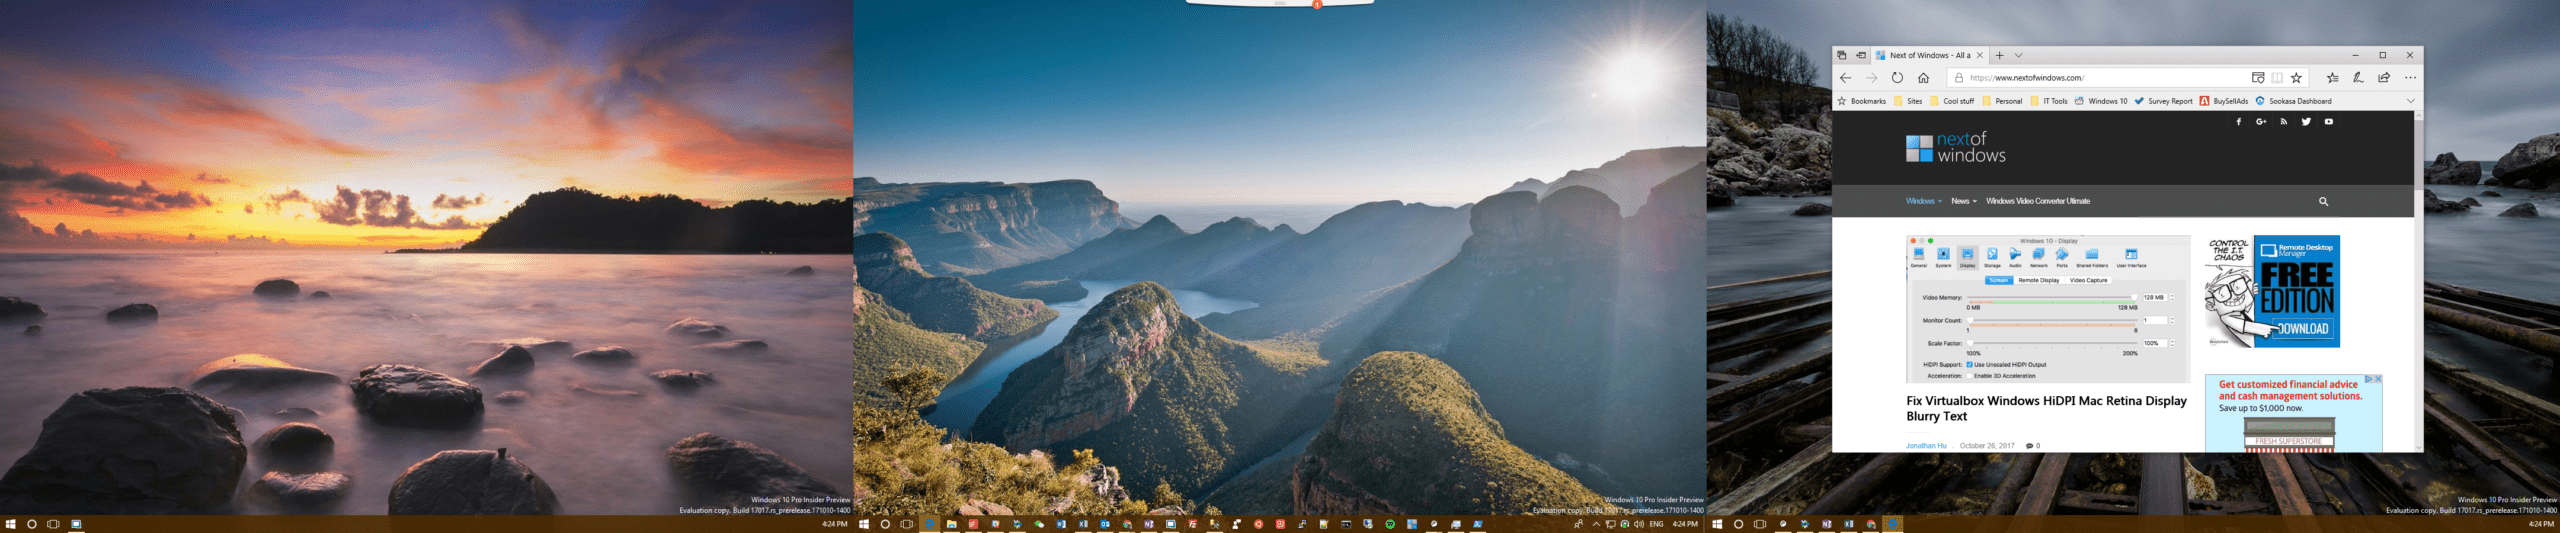 Screenshot 3 - Windows 10 Tip: How To Quickly Move One Window from One Screen to Another